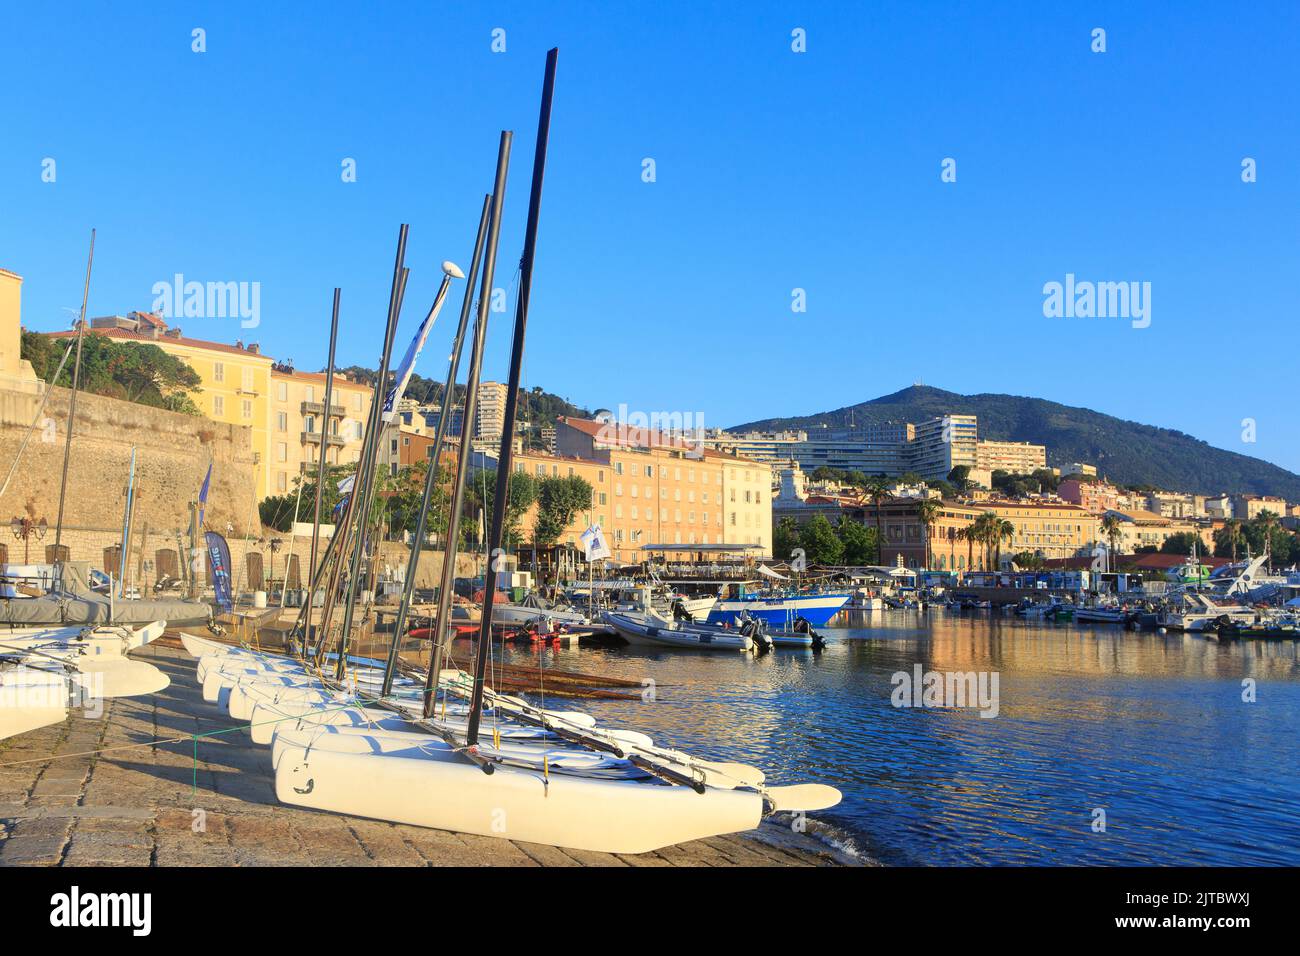 Recreational watercraft, motorboats and fishing vessels and at the port of Ajaccio (Corse-du-Sud) on the island of Corsica, France Stock Photo